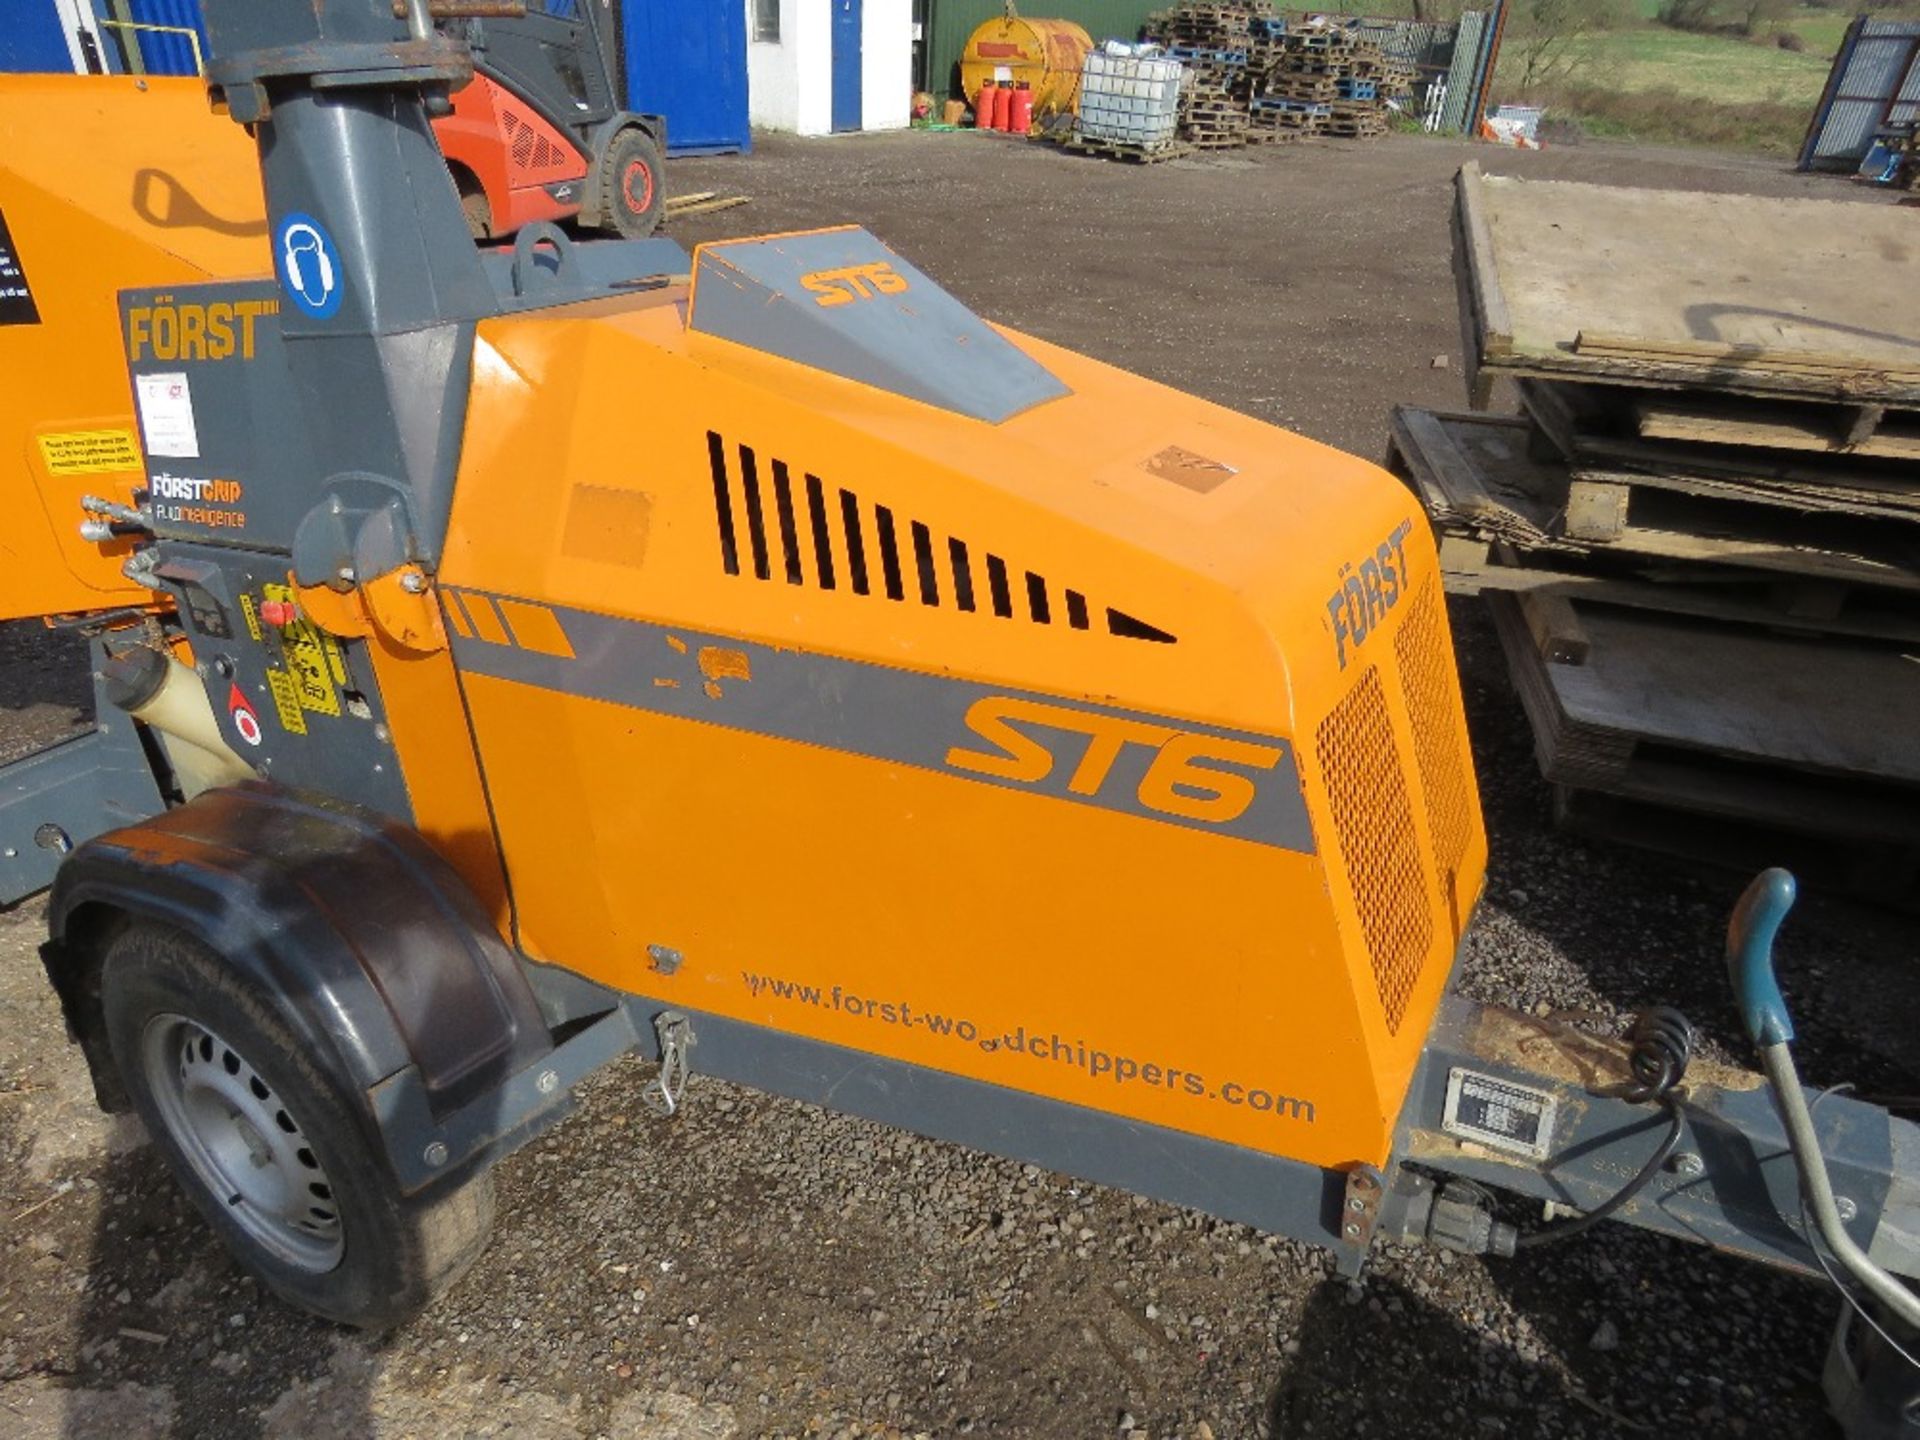 FORST ST6 TOWED SHREDDER, 488 REC HOURS. SUPPLIED WITH KEY, SPARE BLADES, HITCH LOCK AND WHEEL LOCK.